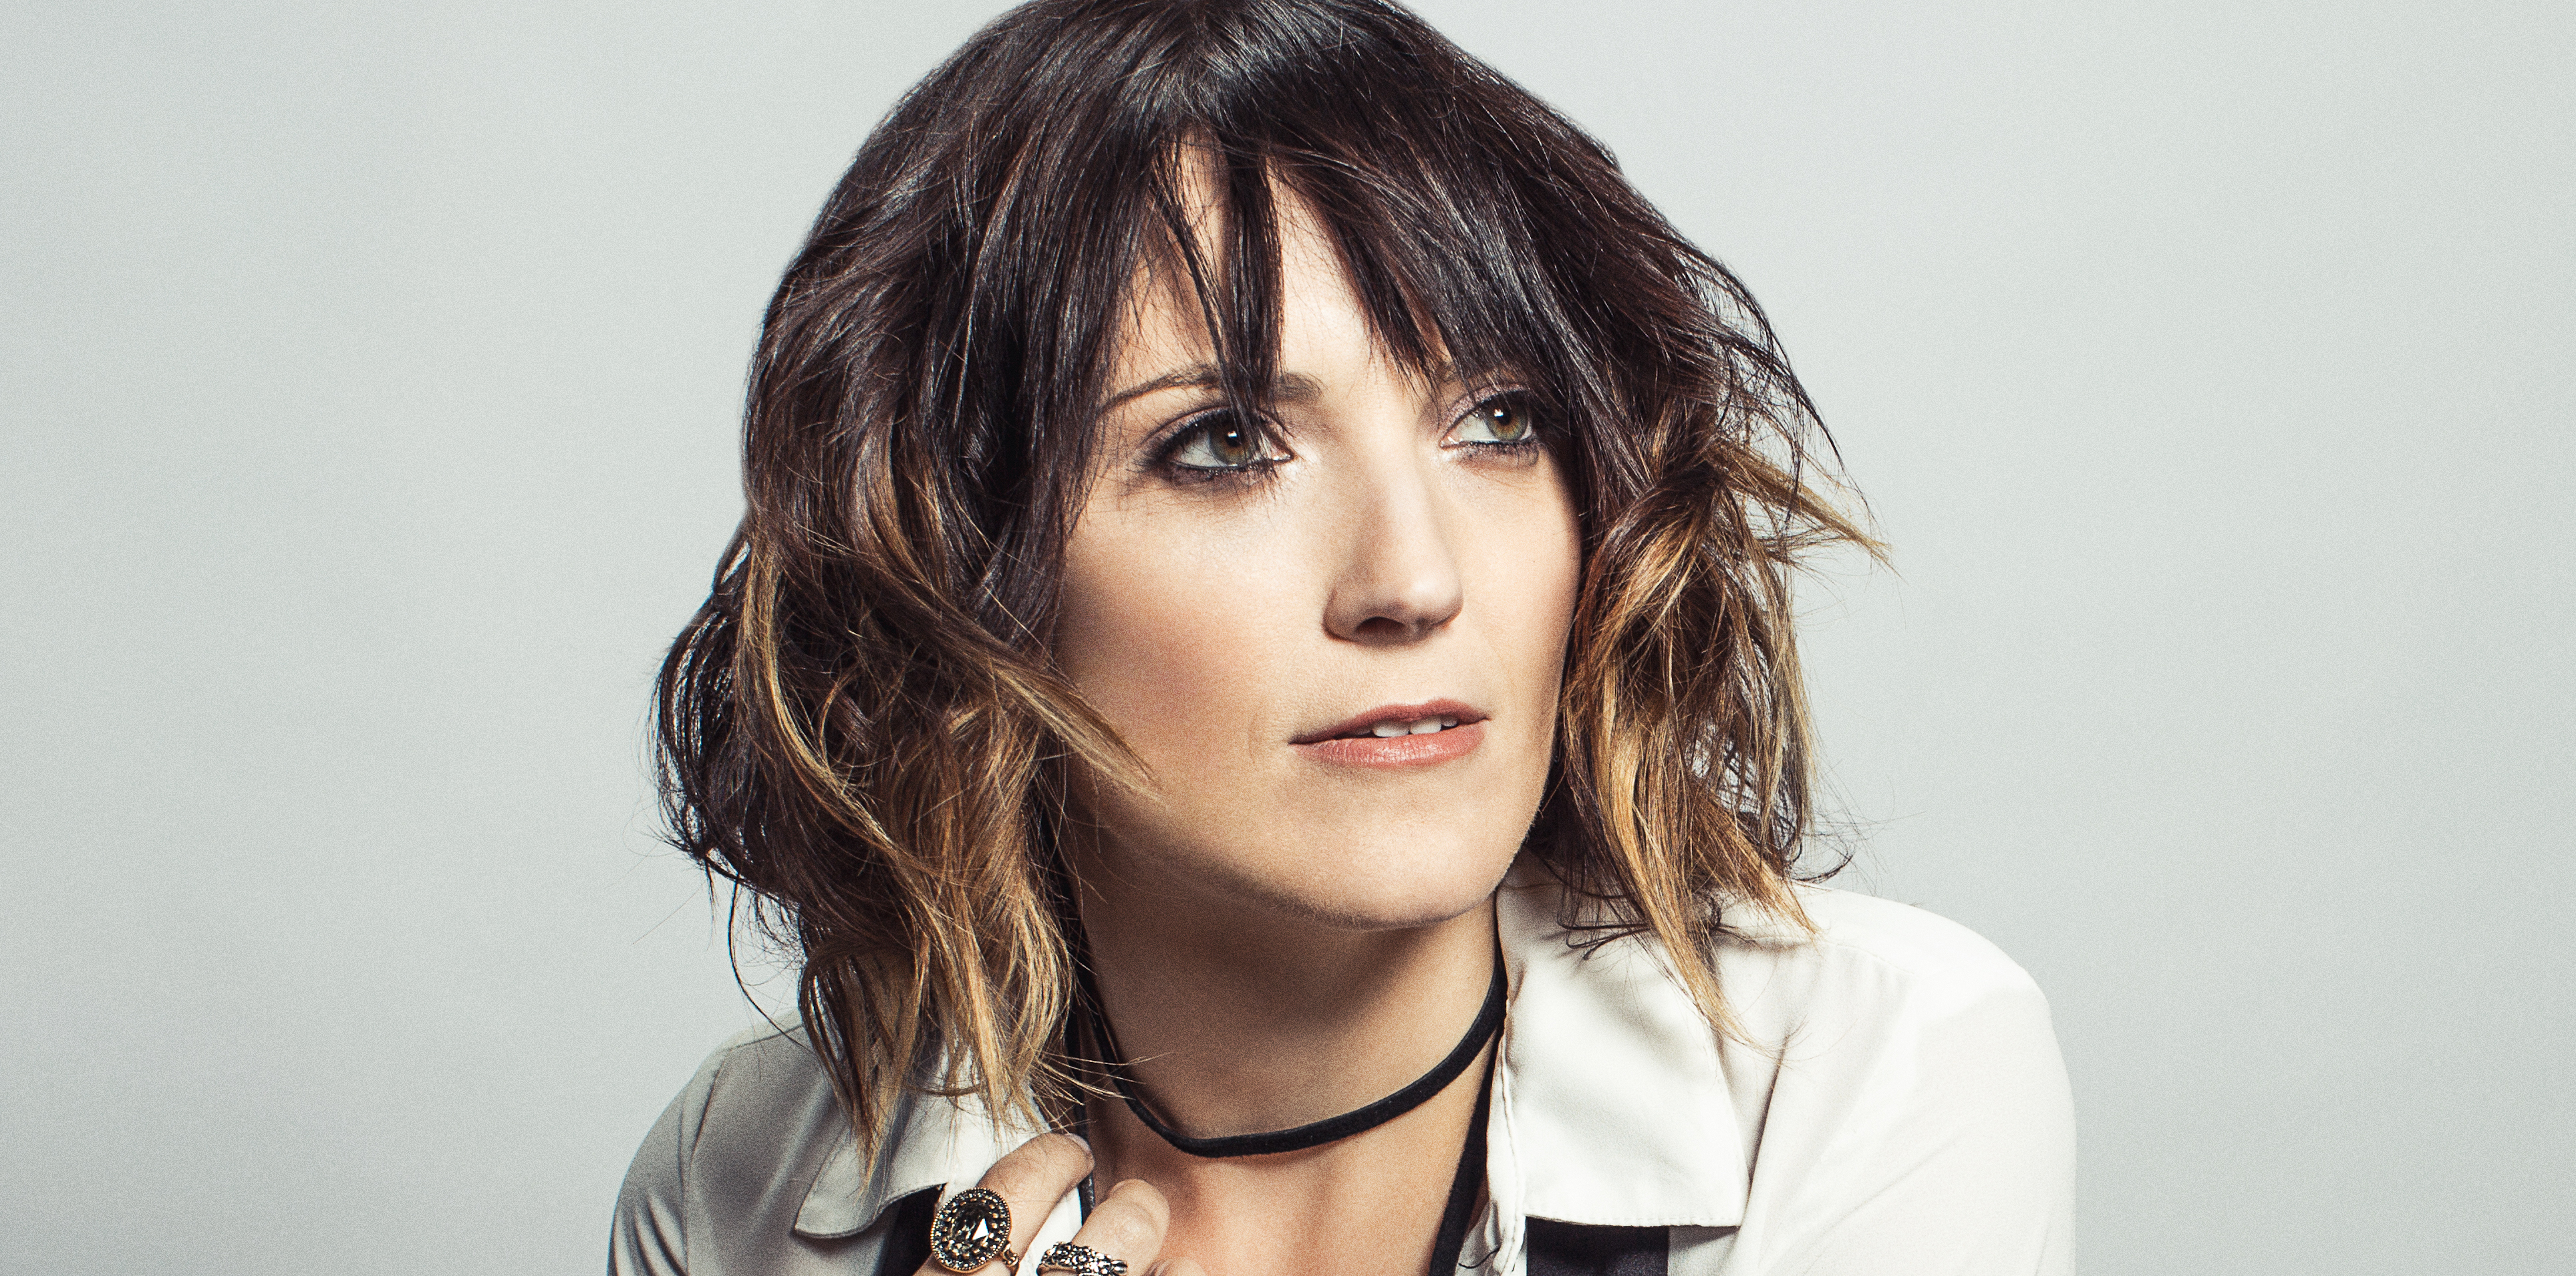 US COMEDIAN, AUTHOR, AND PODCASTER JEN KIRKMAN RETURNS WITH THE ALL NEW MATERIAL, GIRL TOUR